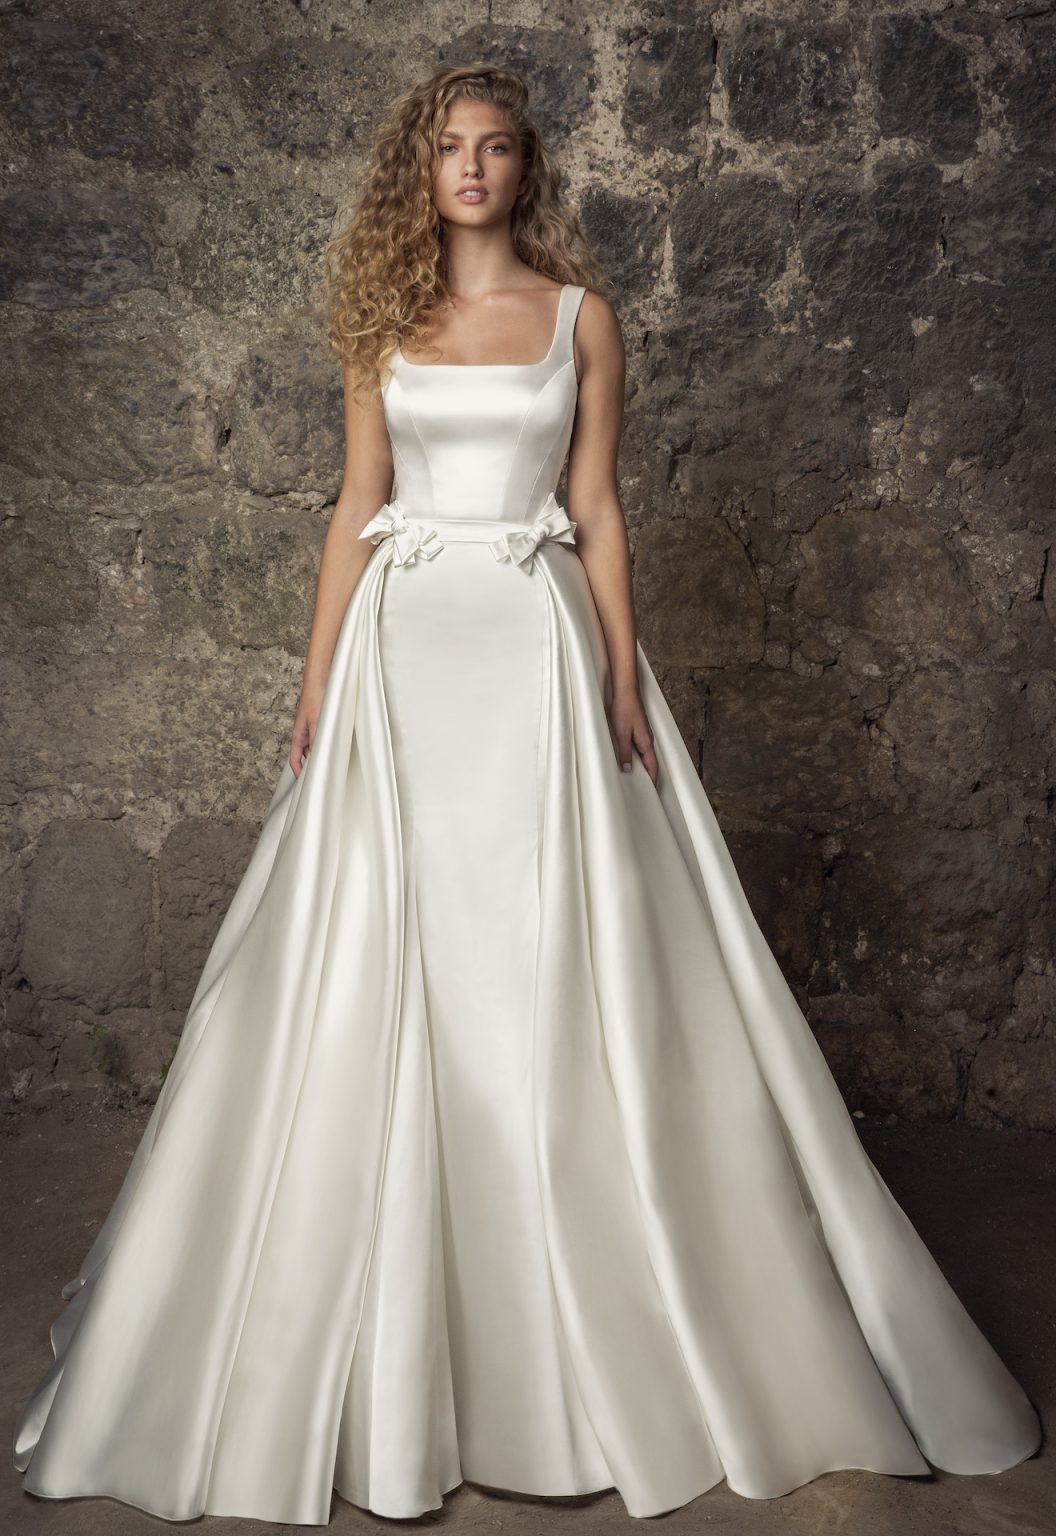 Sleeveless Satin Square Neck Mermaid Wedding Dress With Pearl Belt And 6186